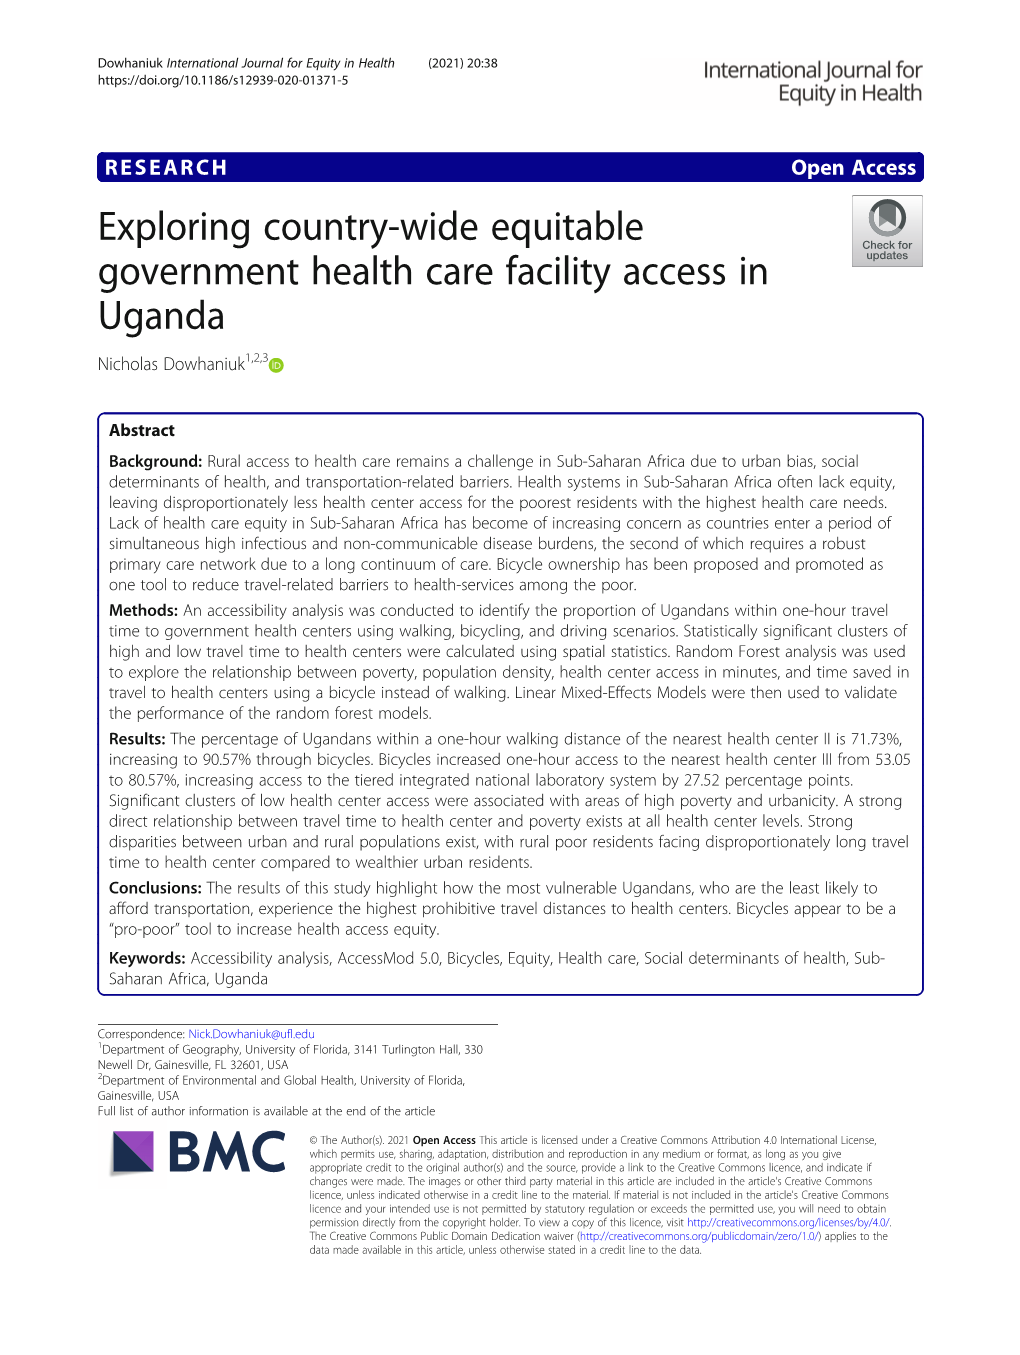 Exploring Country-Wide Equitable Government Health Care Facility Access in Uganda Nicholas Dowhaniuk1,2,3